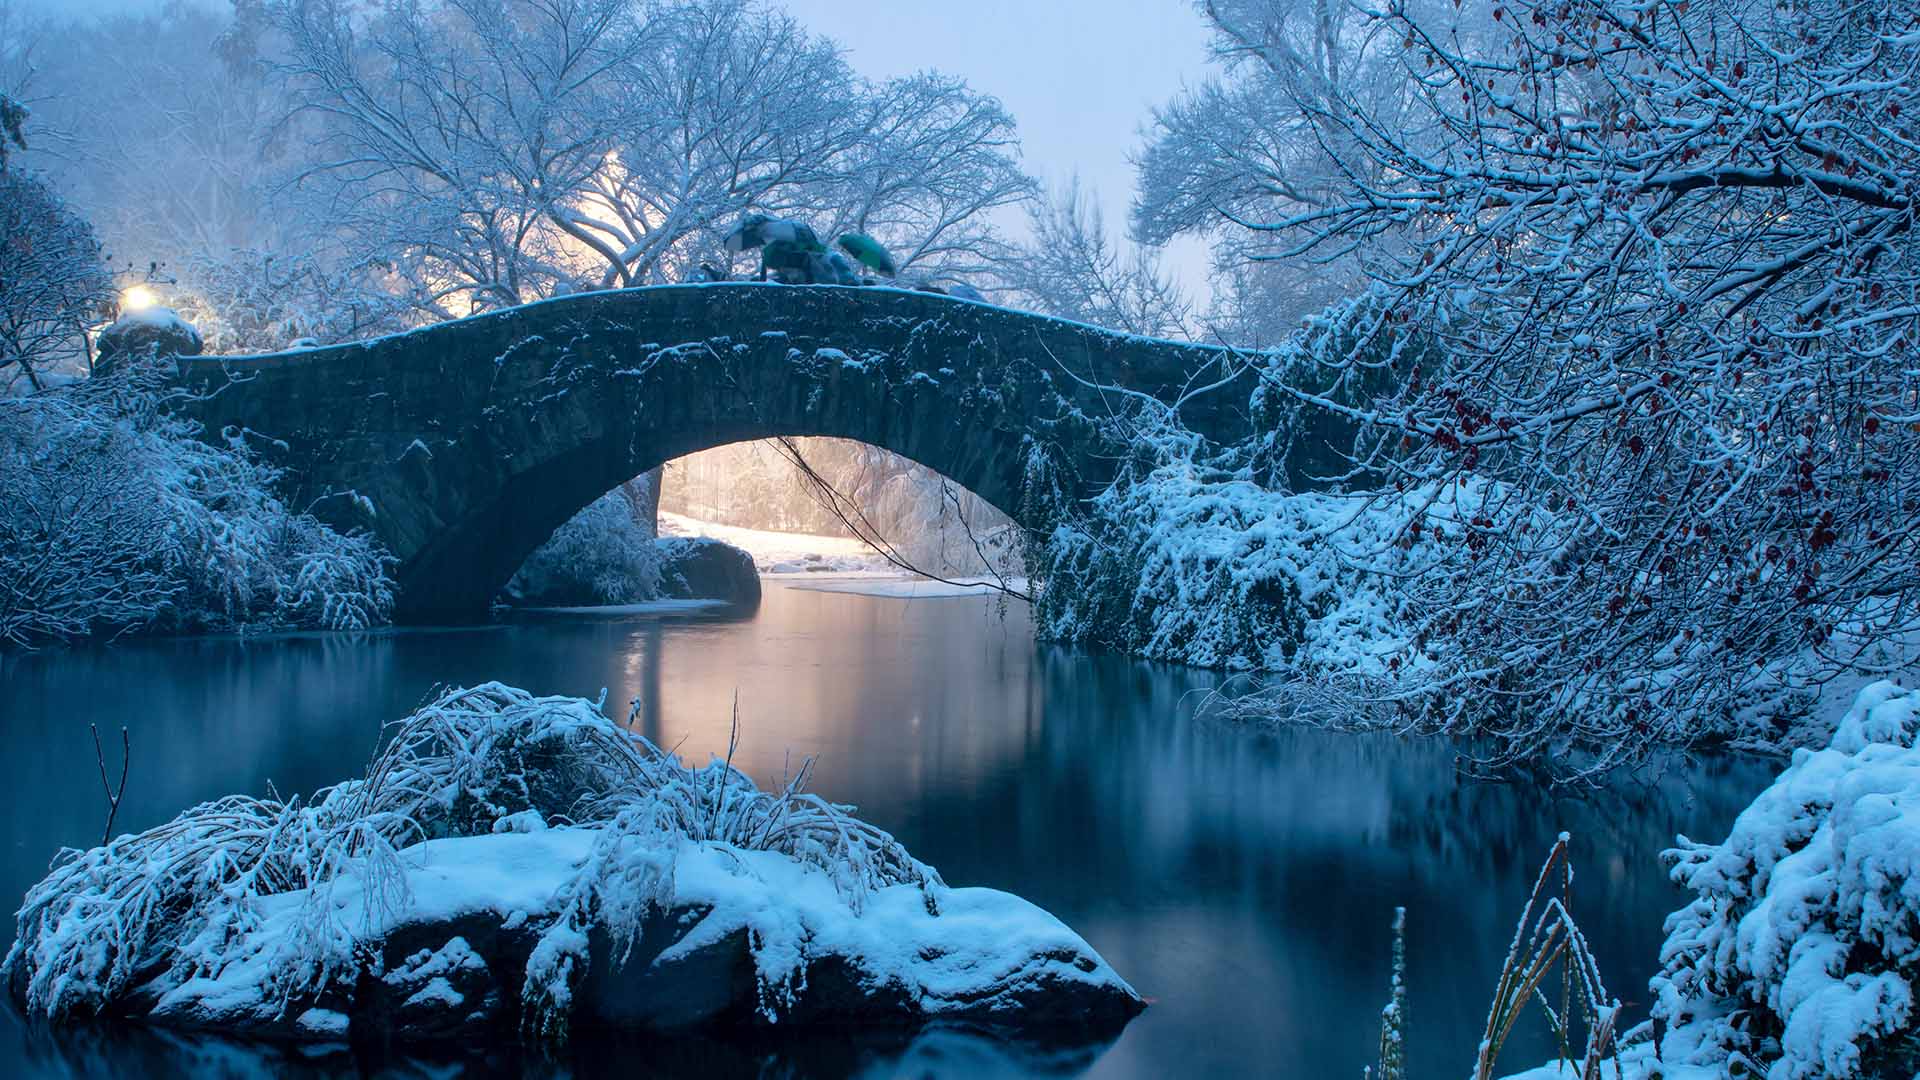 A snow-covered landscape with water running under a bridge in the United States